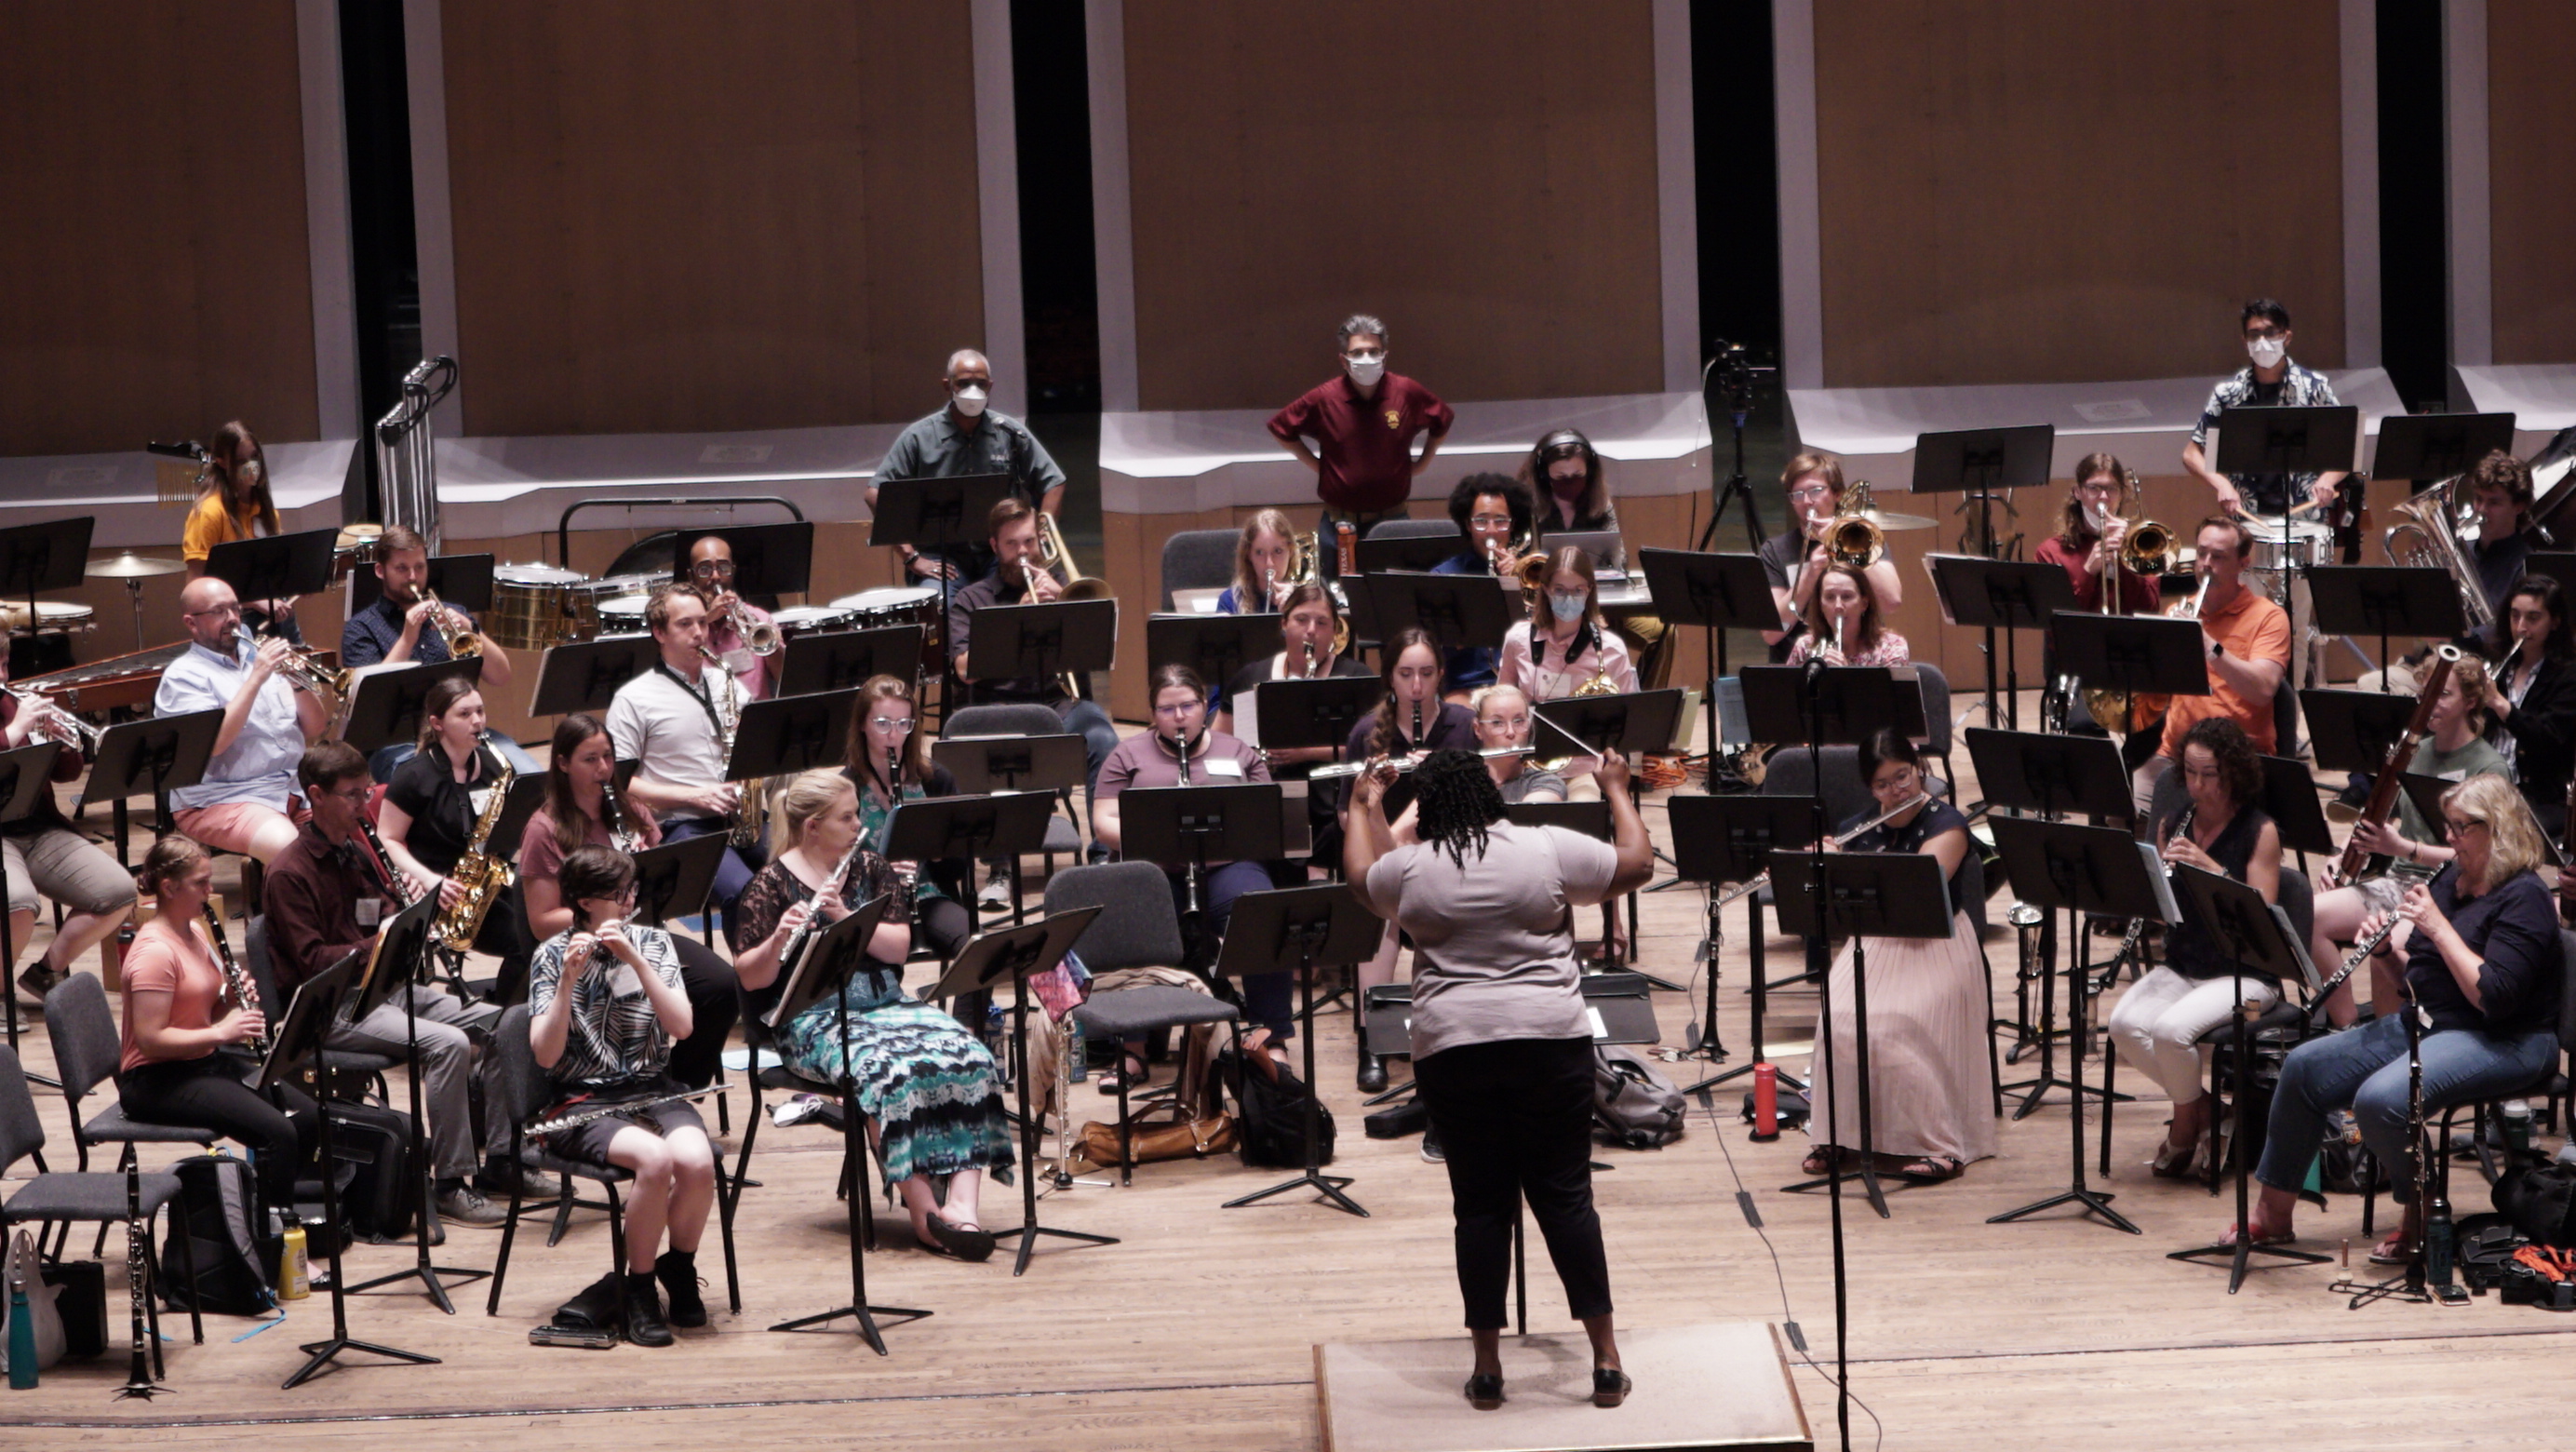 A participant leads the Wind Band Conducting Workshop band in practice of their conducting skills